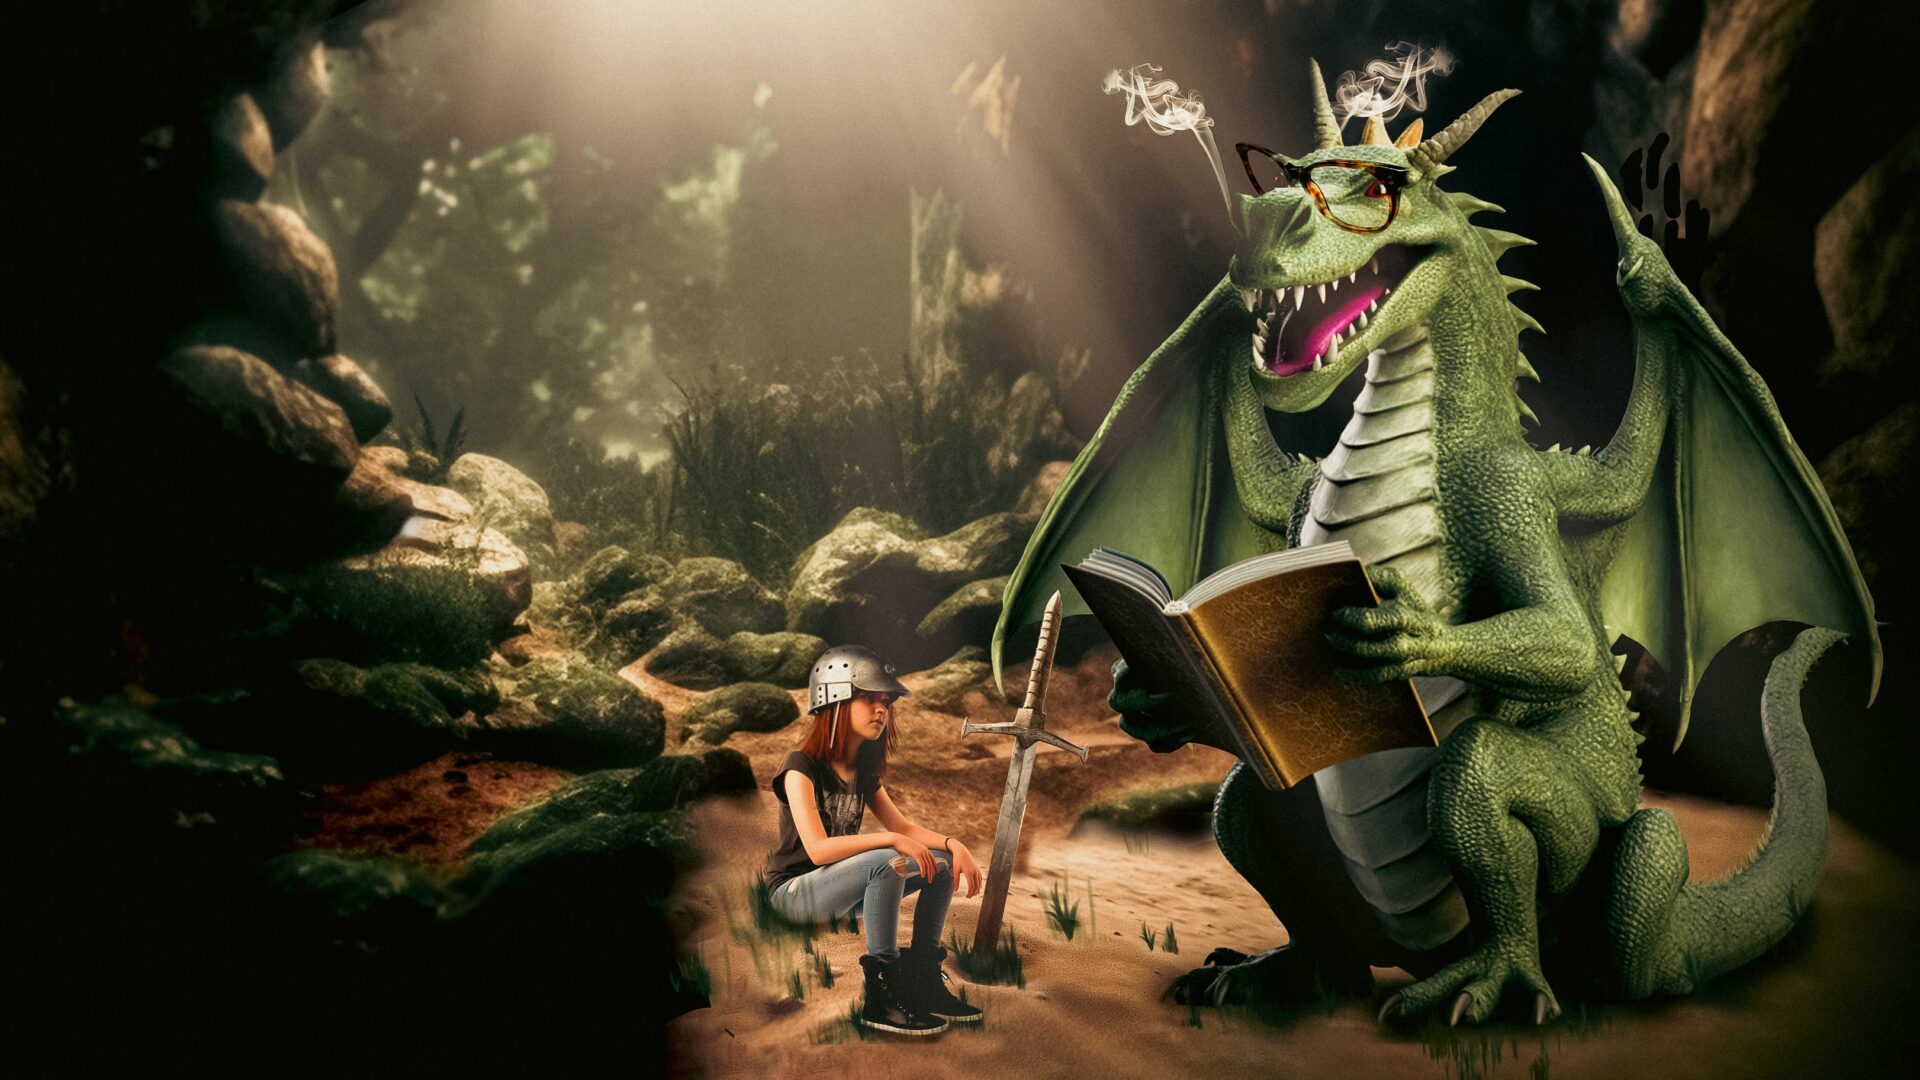 Image of The Reluctant Dragon event